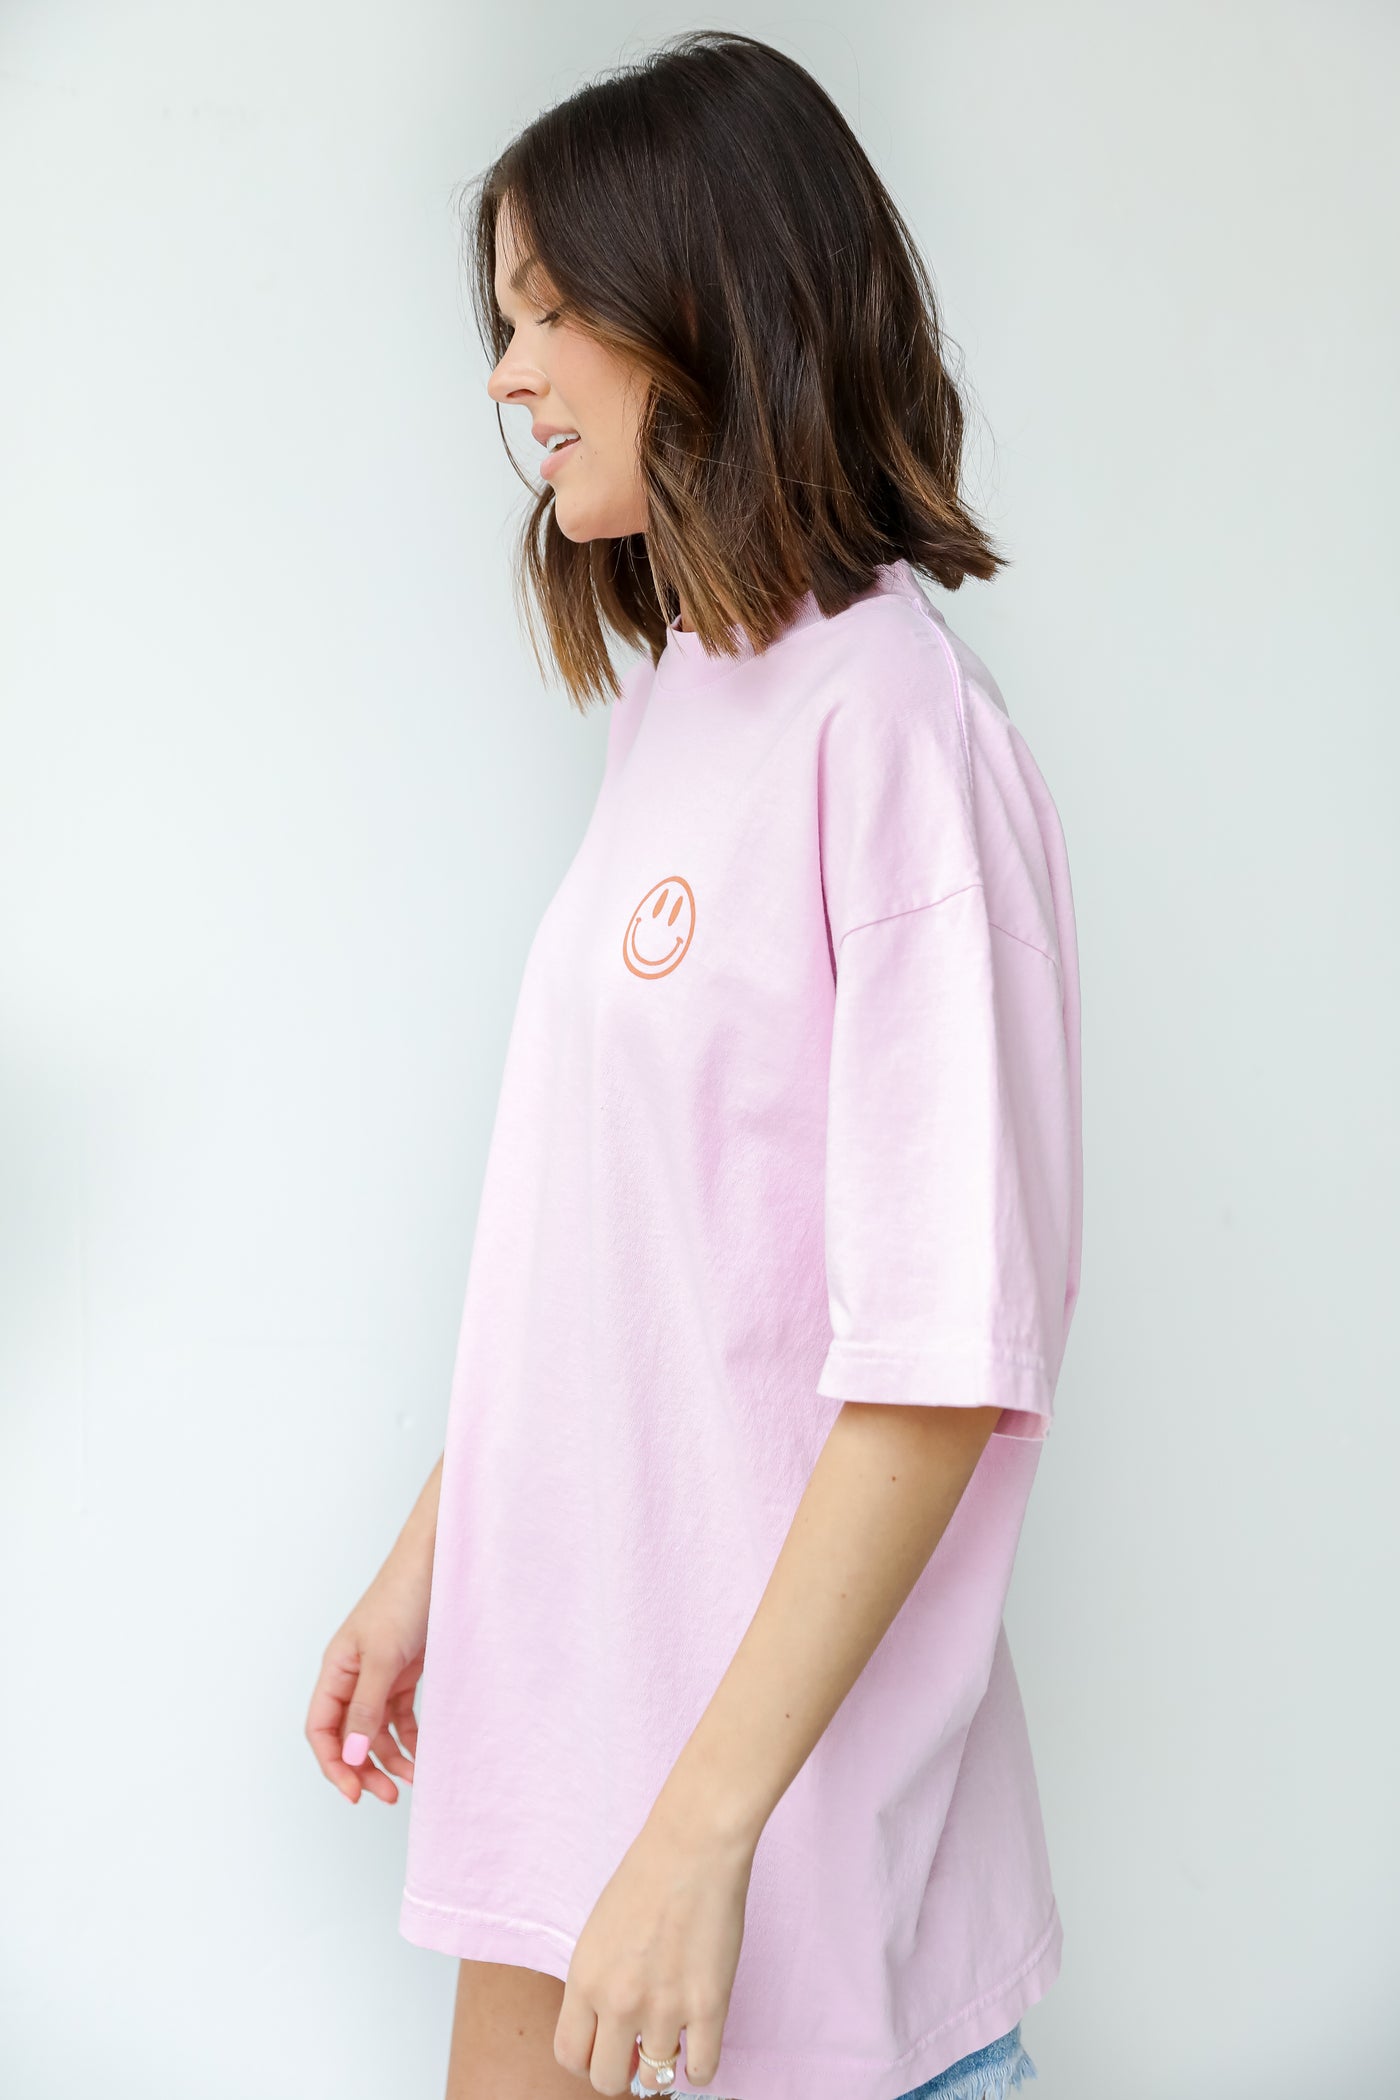 Love Forever Smiley Face Graphic Tee side view